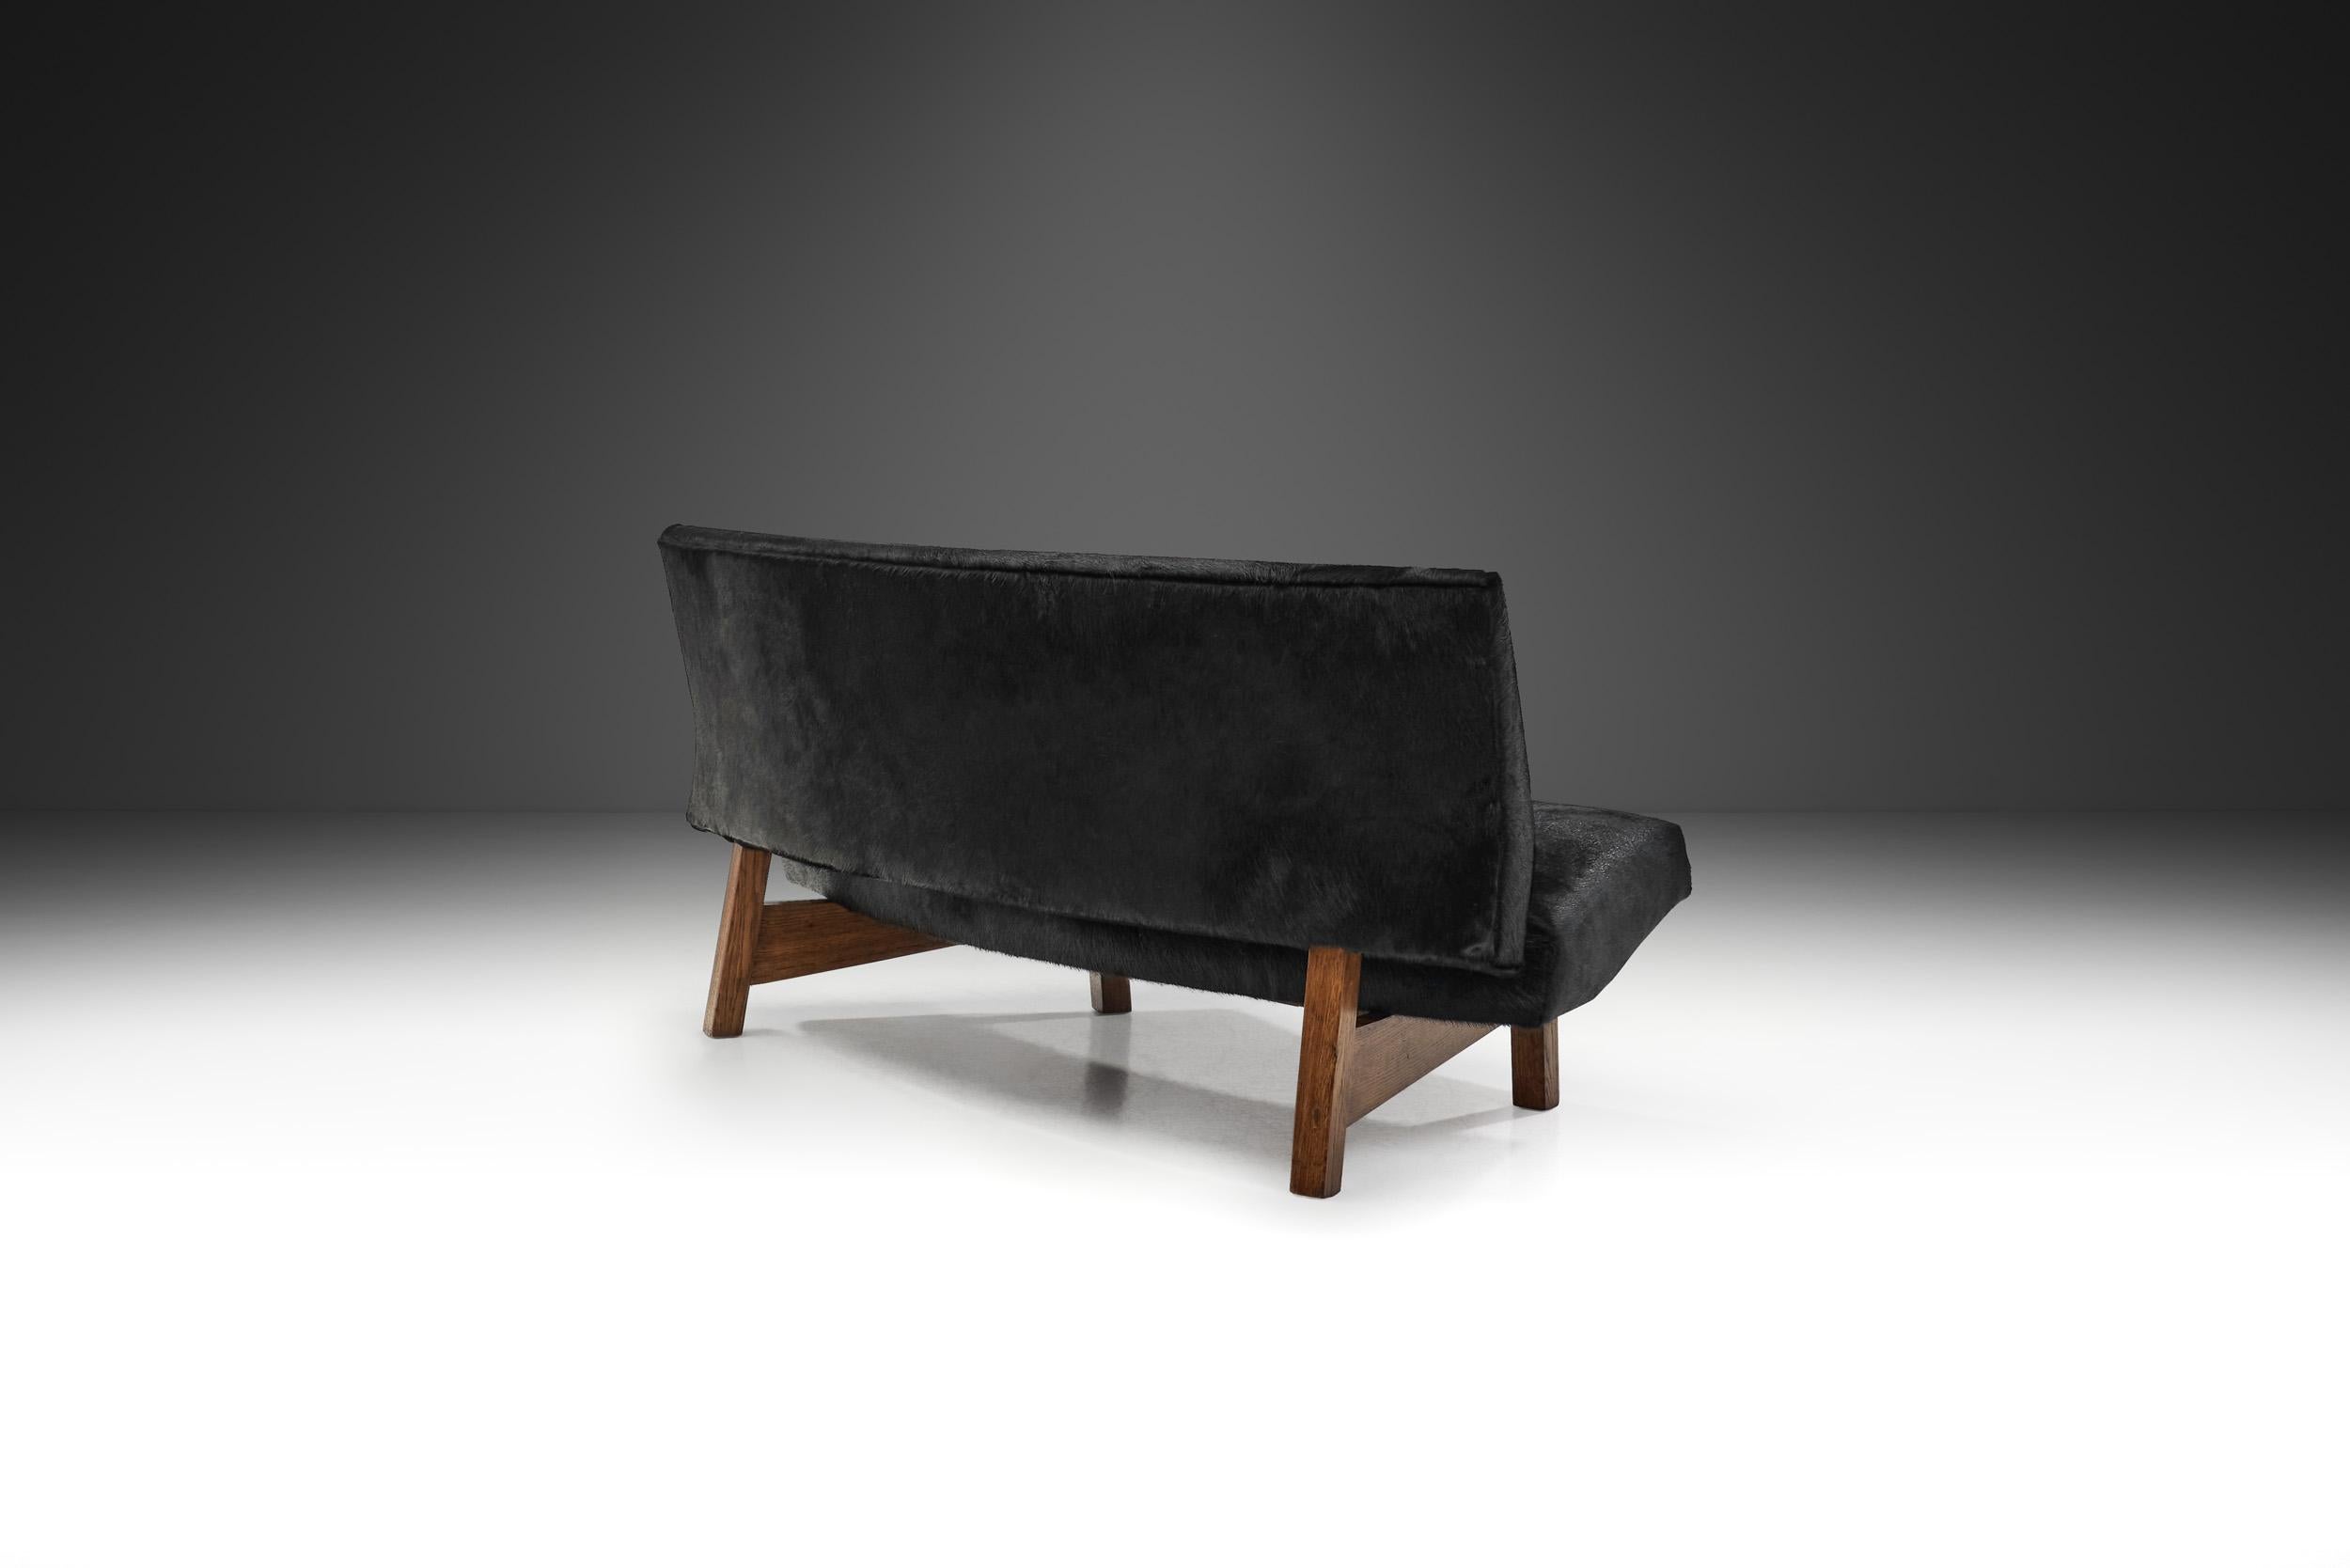 European Mid-Century Sofa in Black Cow Hide, Europe ca 1950s In Good Condition For Sale In Utrecht, NL